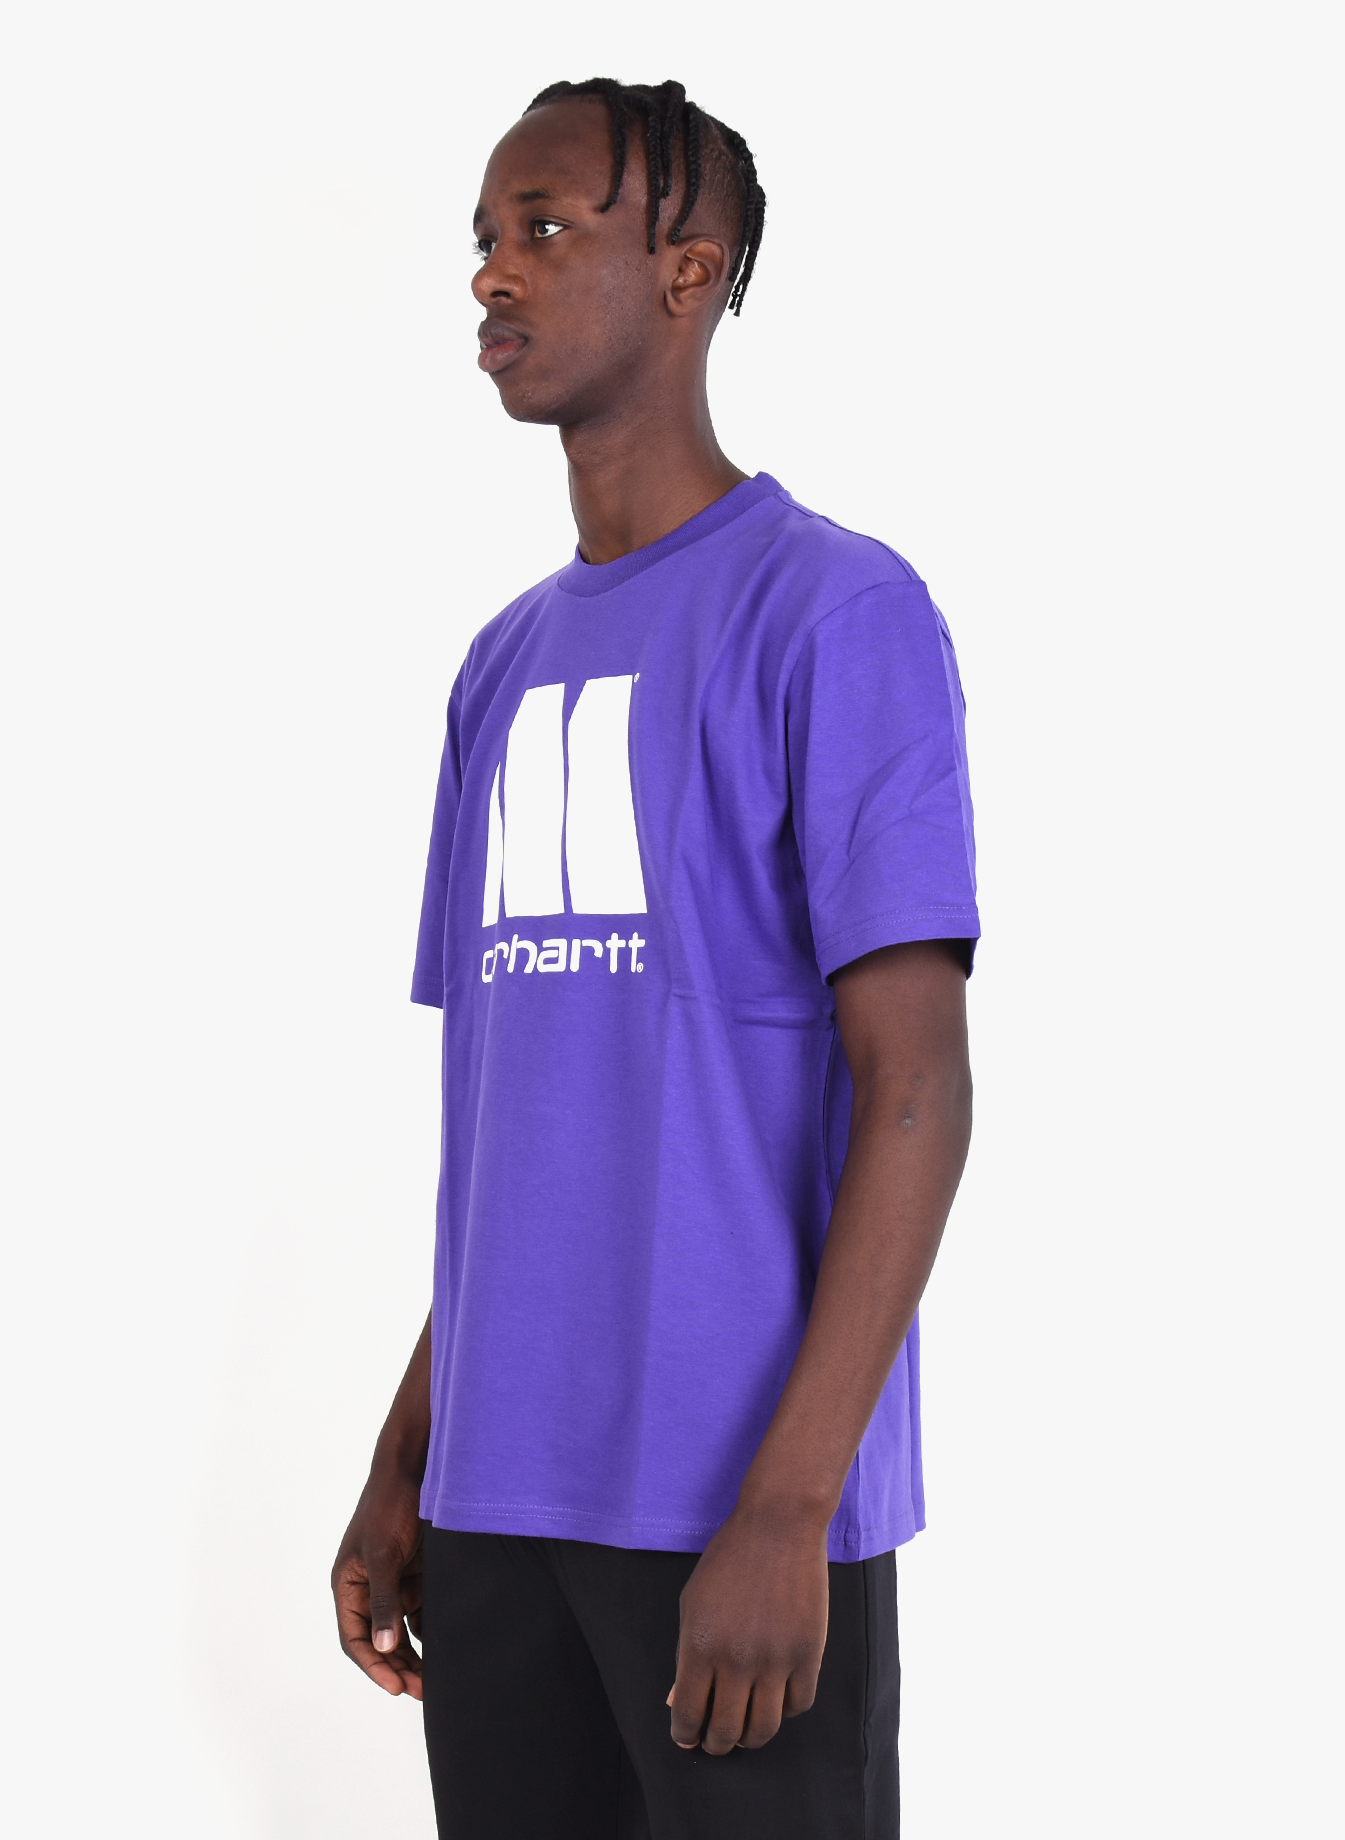 Carhartt WIP 'Motown' WIP T-shirt Prism Violet White - Mensquare